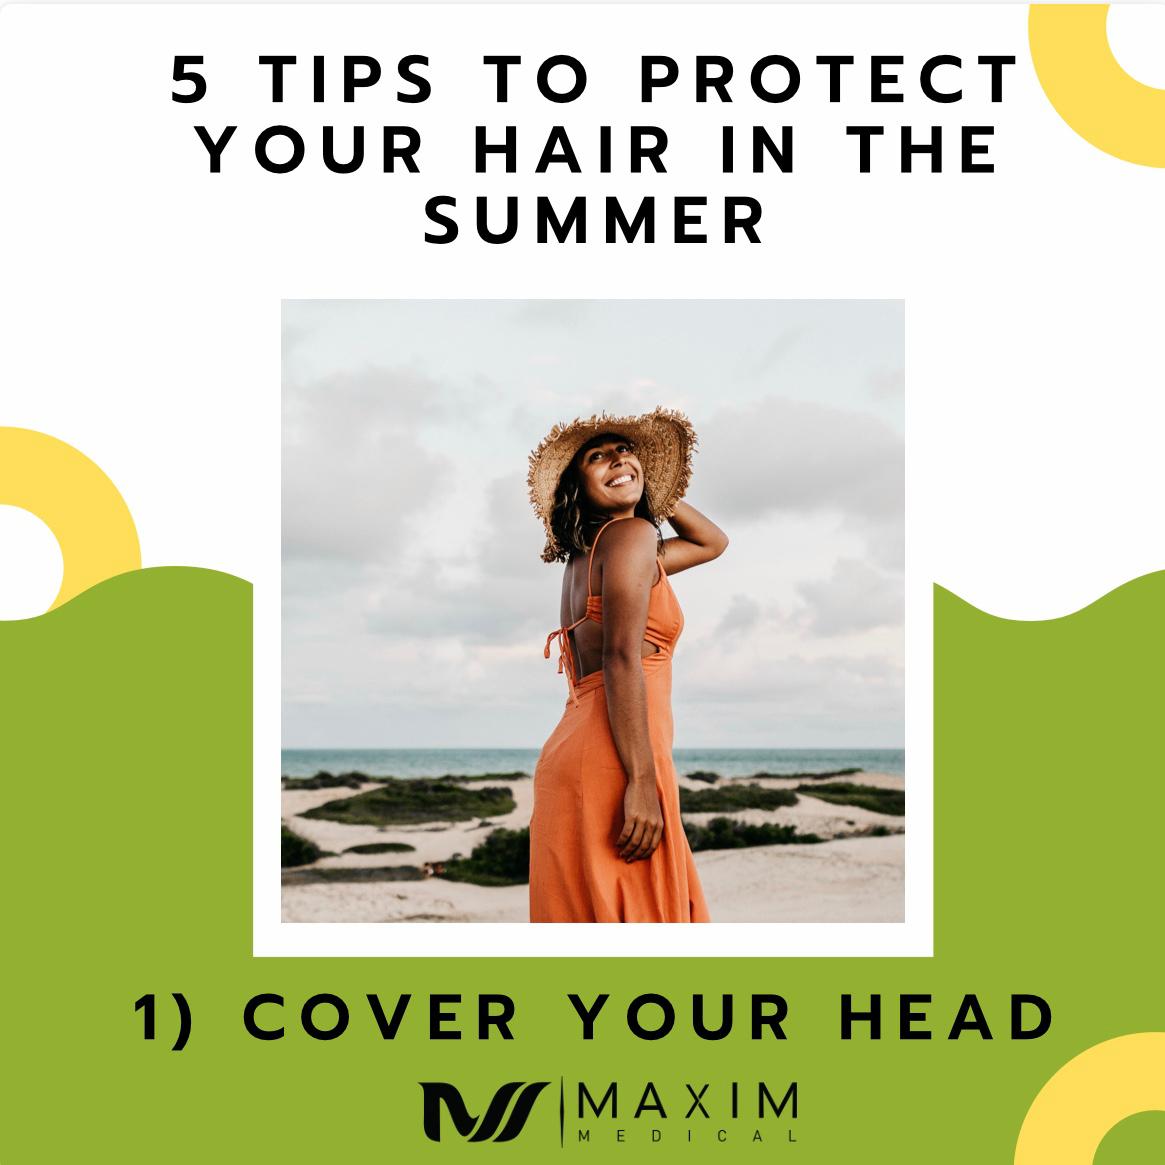 5 Tips To Protect Your Hair In The Summer

1. Cover Your Head
One of the easiest ways to protect your hair and scalp from sun damage is to wear a hat when long exposure to the sun is expected. If you are concerned about the potential of losing your hair from wearing hats, you can put your worries to rest. It is a myth that wearing a hat and losing hair are correlated. This myth is commonly believed because of the general knowledge that heat and pressure can restrict blood to the hair follicles.

Full article on our website: